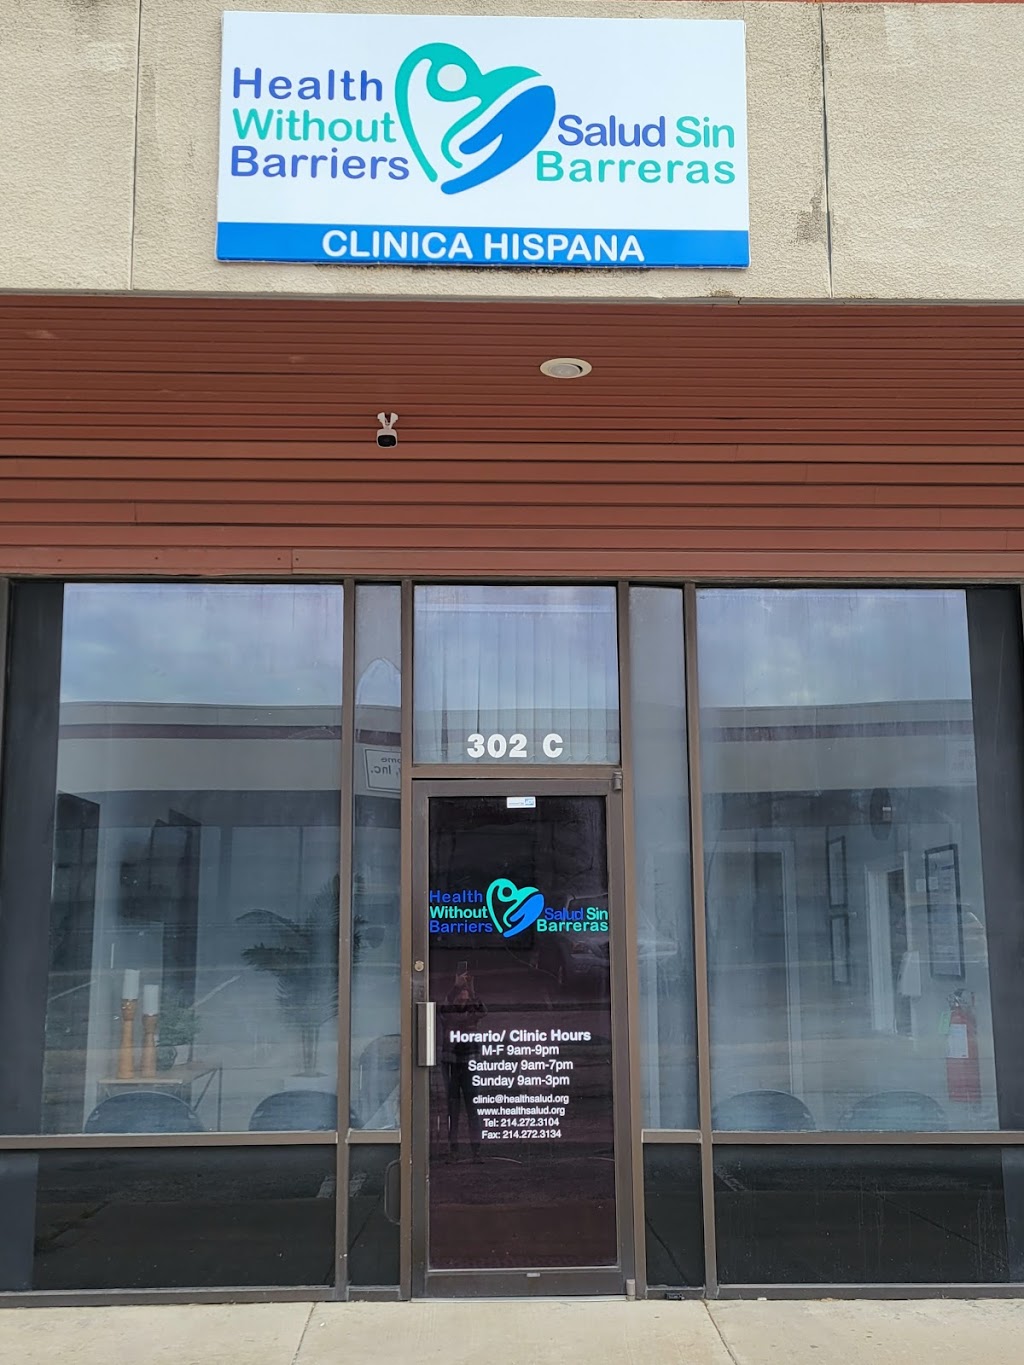 Clinica Hispana Salud Sin Barreras / Health Without Barriers | 2033 Military Pkwy Suite 302C, Mesquite, TX 75149, USA | Phone: (214) 272-3104